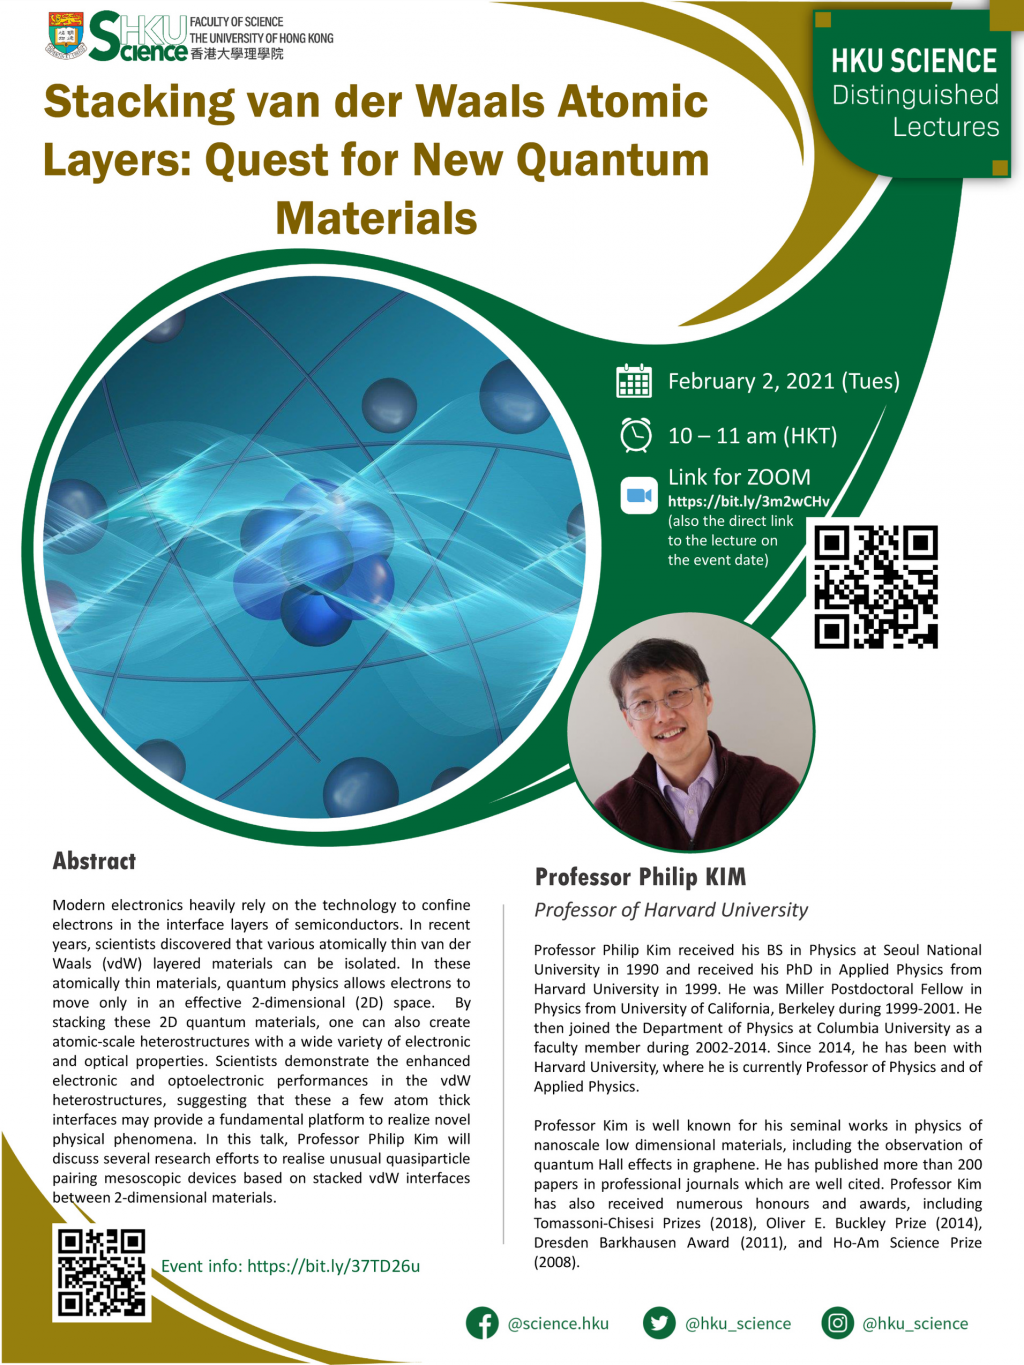 Distinguished Lecture Series - Stacking van der Waals Atomic Layers: Quest for New Quantum Materials